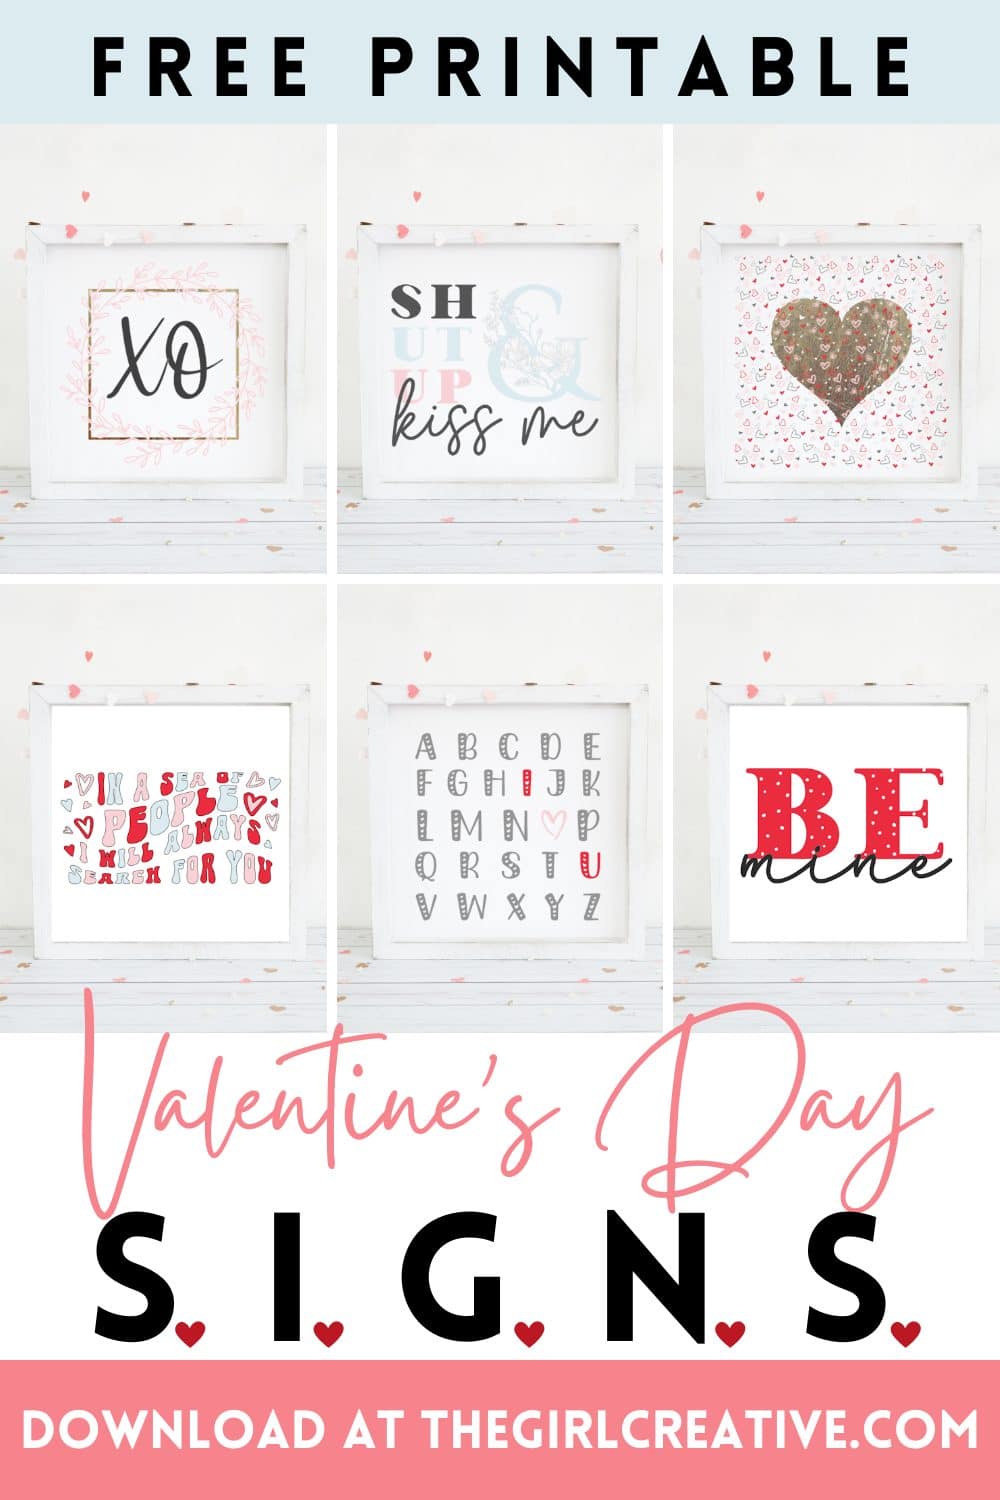 A collage of Valentine's Day graphics that can be printed and used as signs.